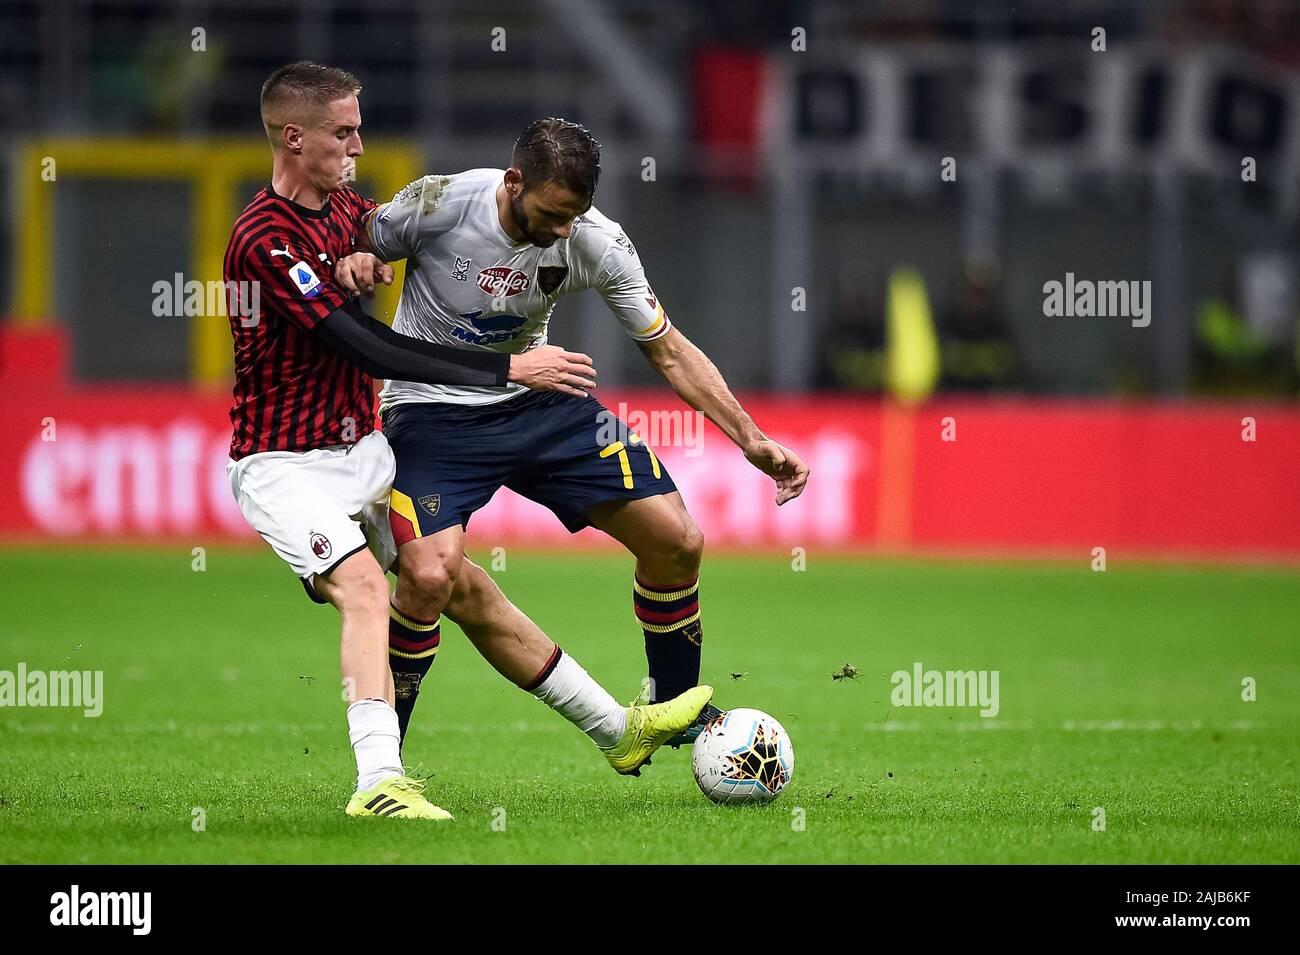 Milan, Italy - 20 October, 2019: Panagiotis Tachtsidis of US Lecce competes for the ball with Andrea Conti of AC Milan during the Serie A football match between AC Milan and US Lecce. The match ended in a 2-2 tie. Credit: Nicolò Campo/Alamy Live News Stock Photo